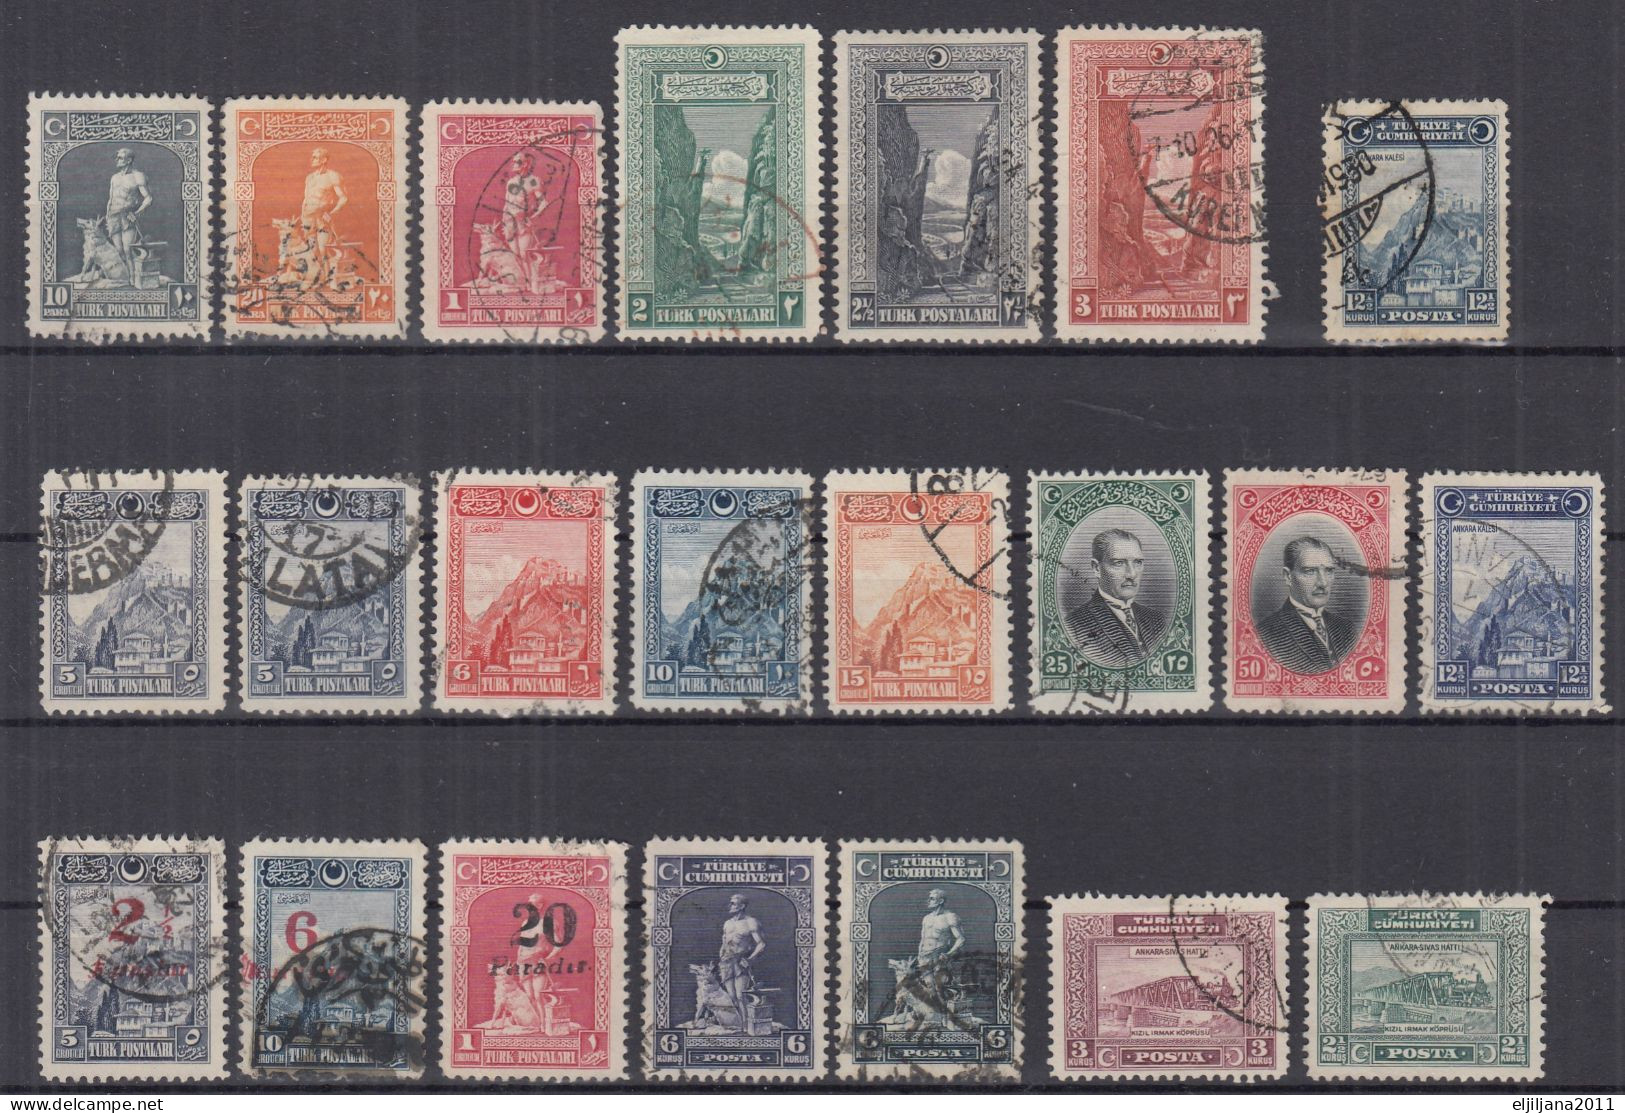 Action !! SALE !! 50 % OFF !! ⁕ Turkey 1926 - 1929 ⁕ Collection / Lot ⁕ 22v Used - Usati